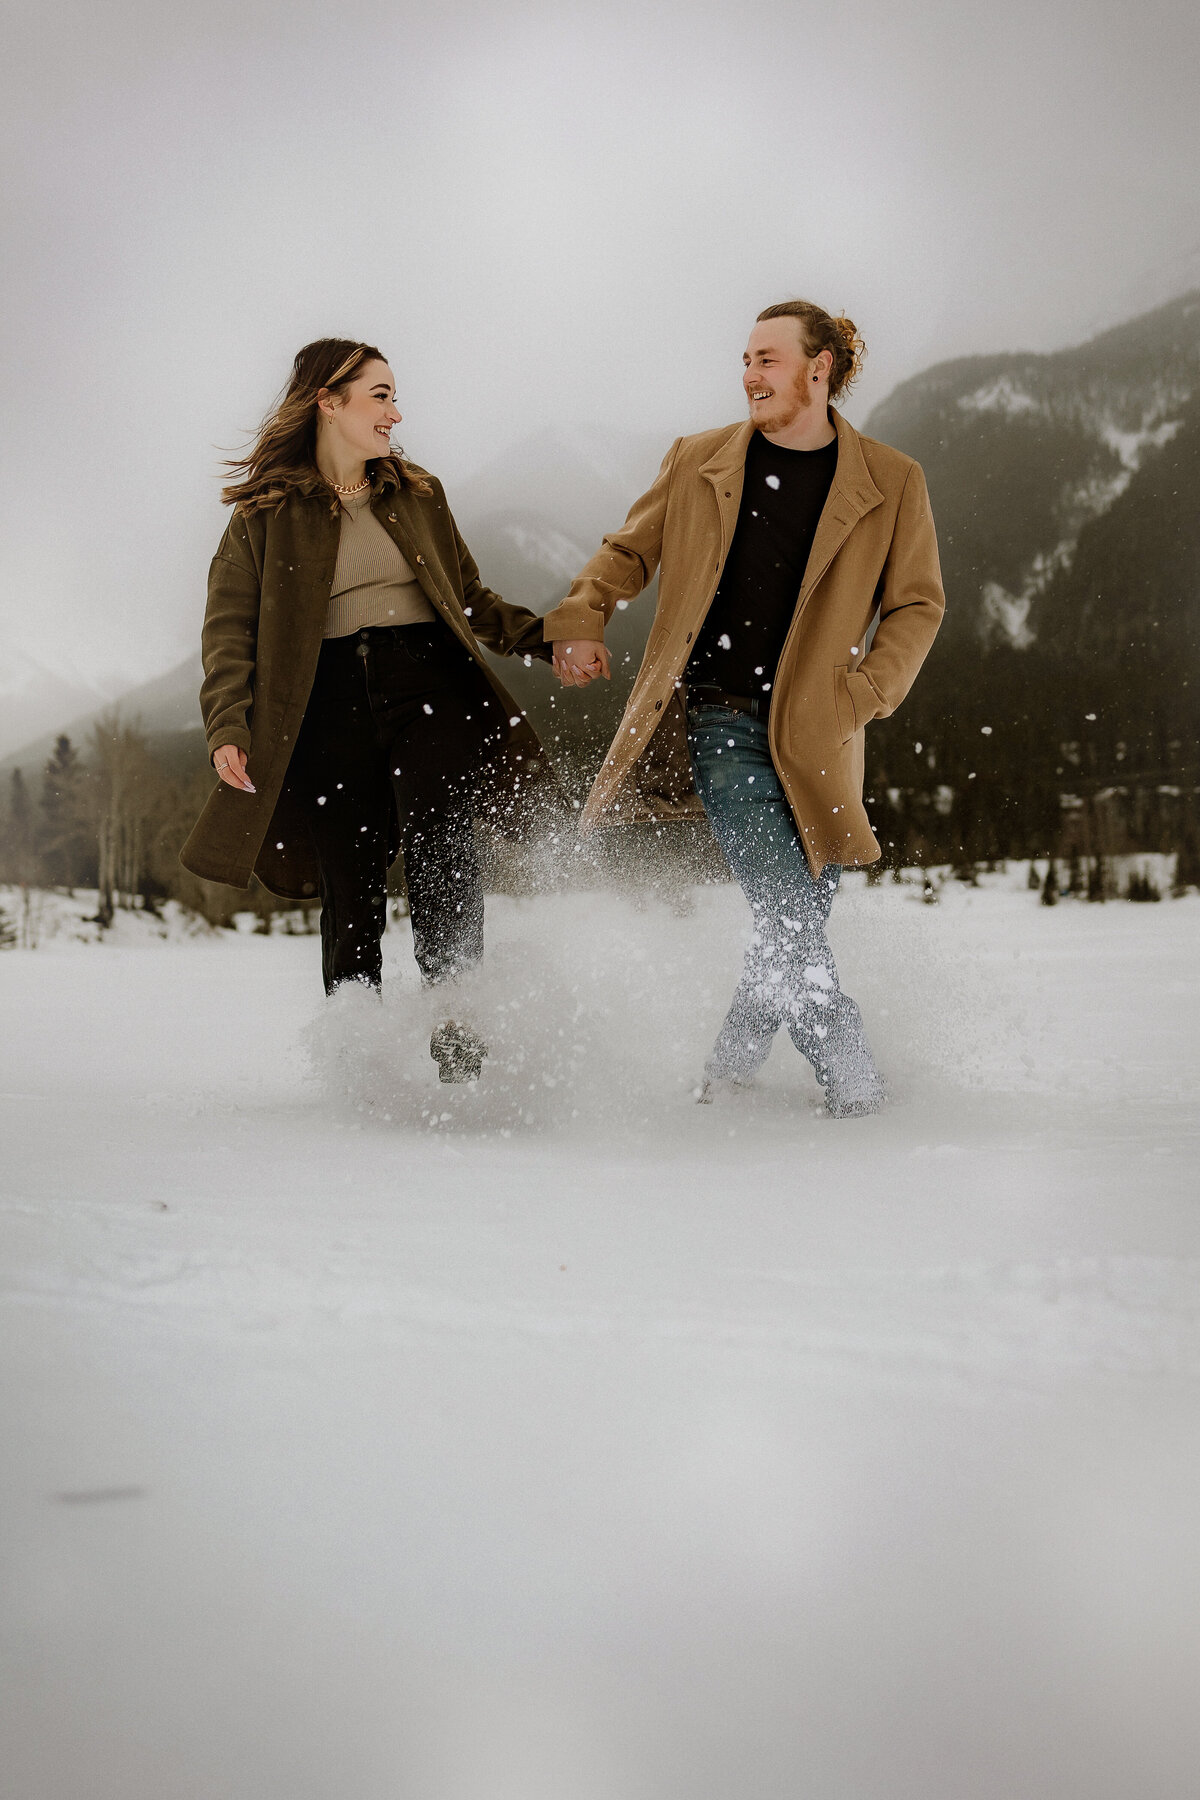 Discover the beauty of Canmore in your family portraits. Our photography sessions in this serene environment are perfect for creating cherished family memories.